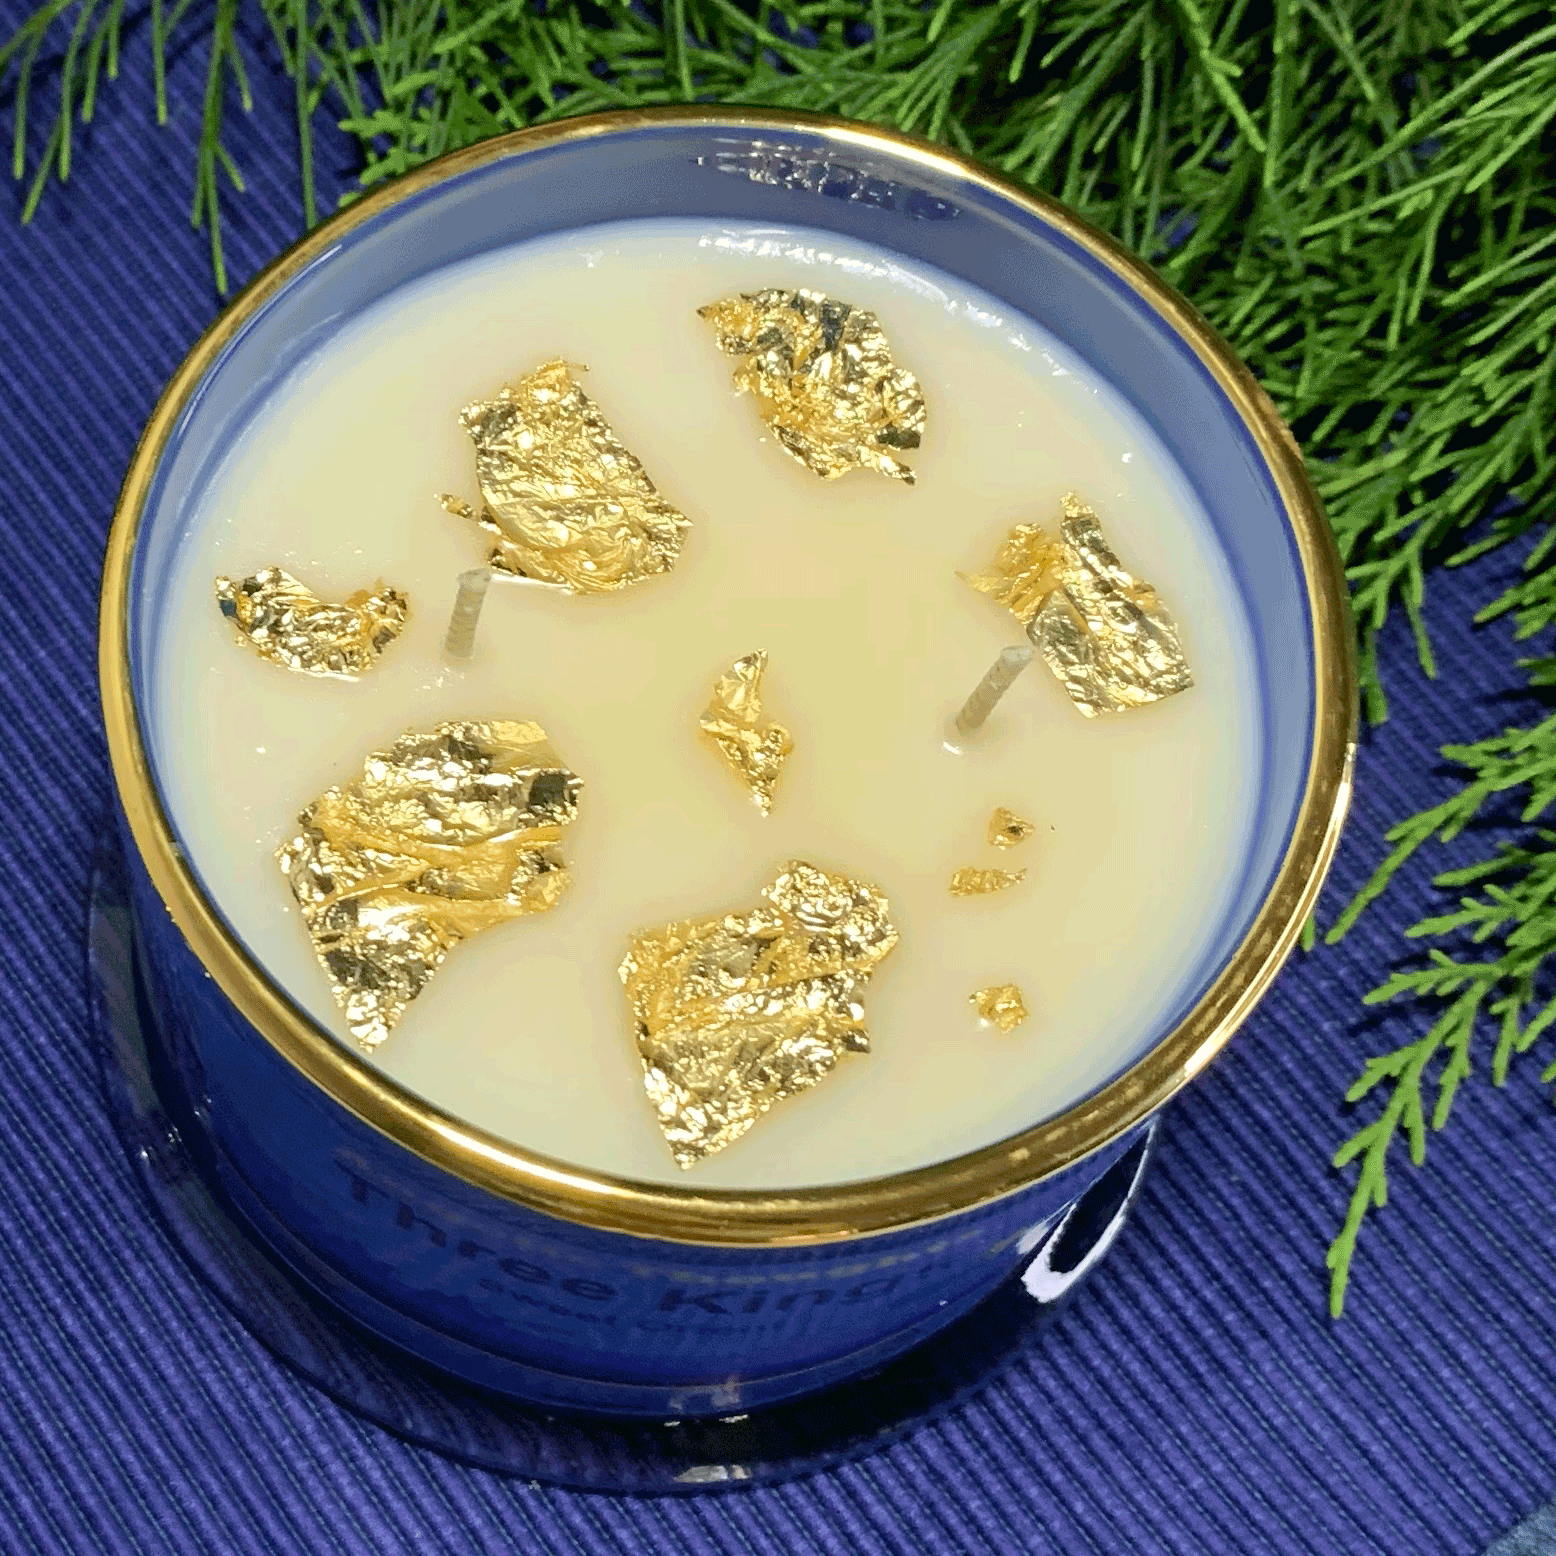 3 Kings Frankincense and Myrrh Soy Wax Candle with Gold Leaf